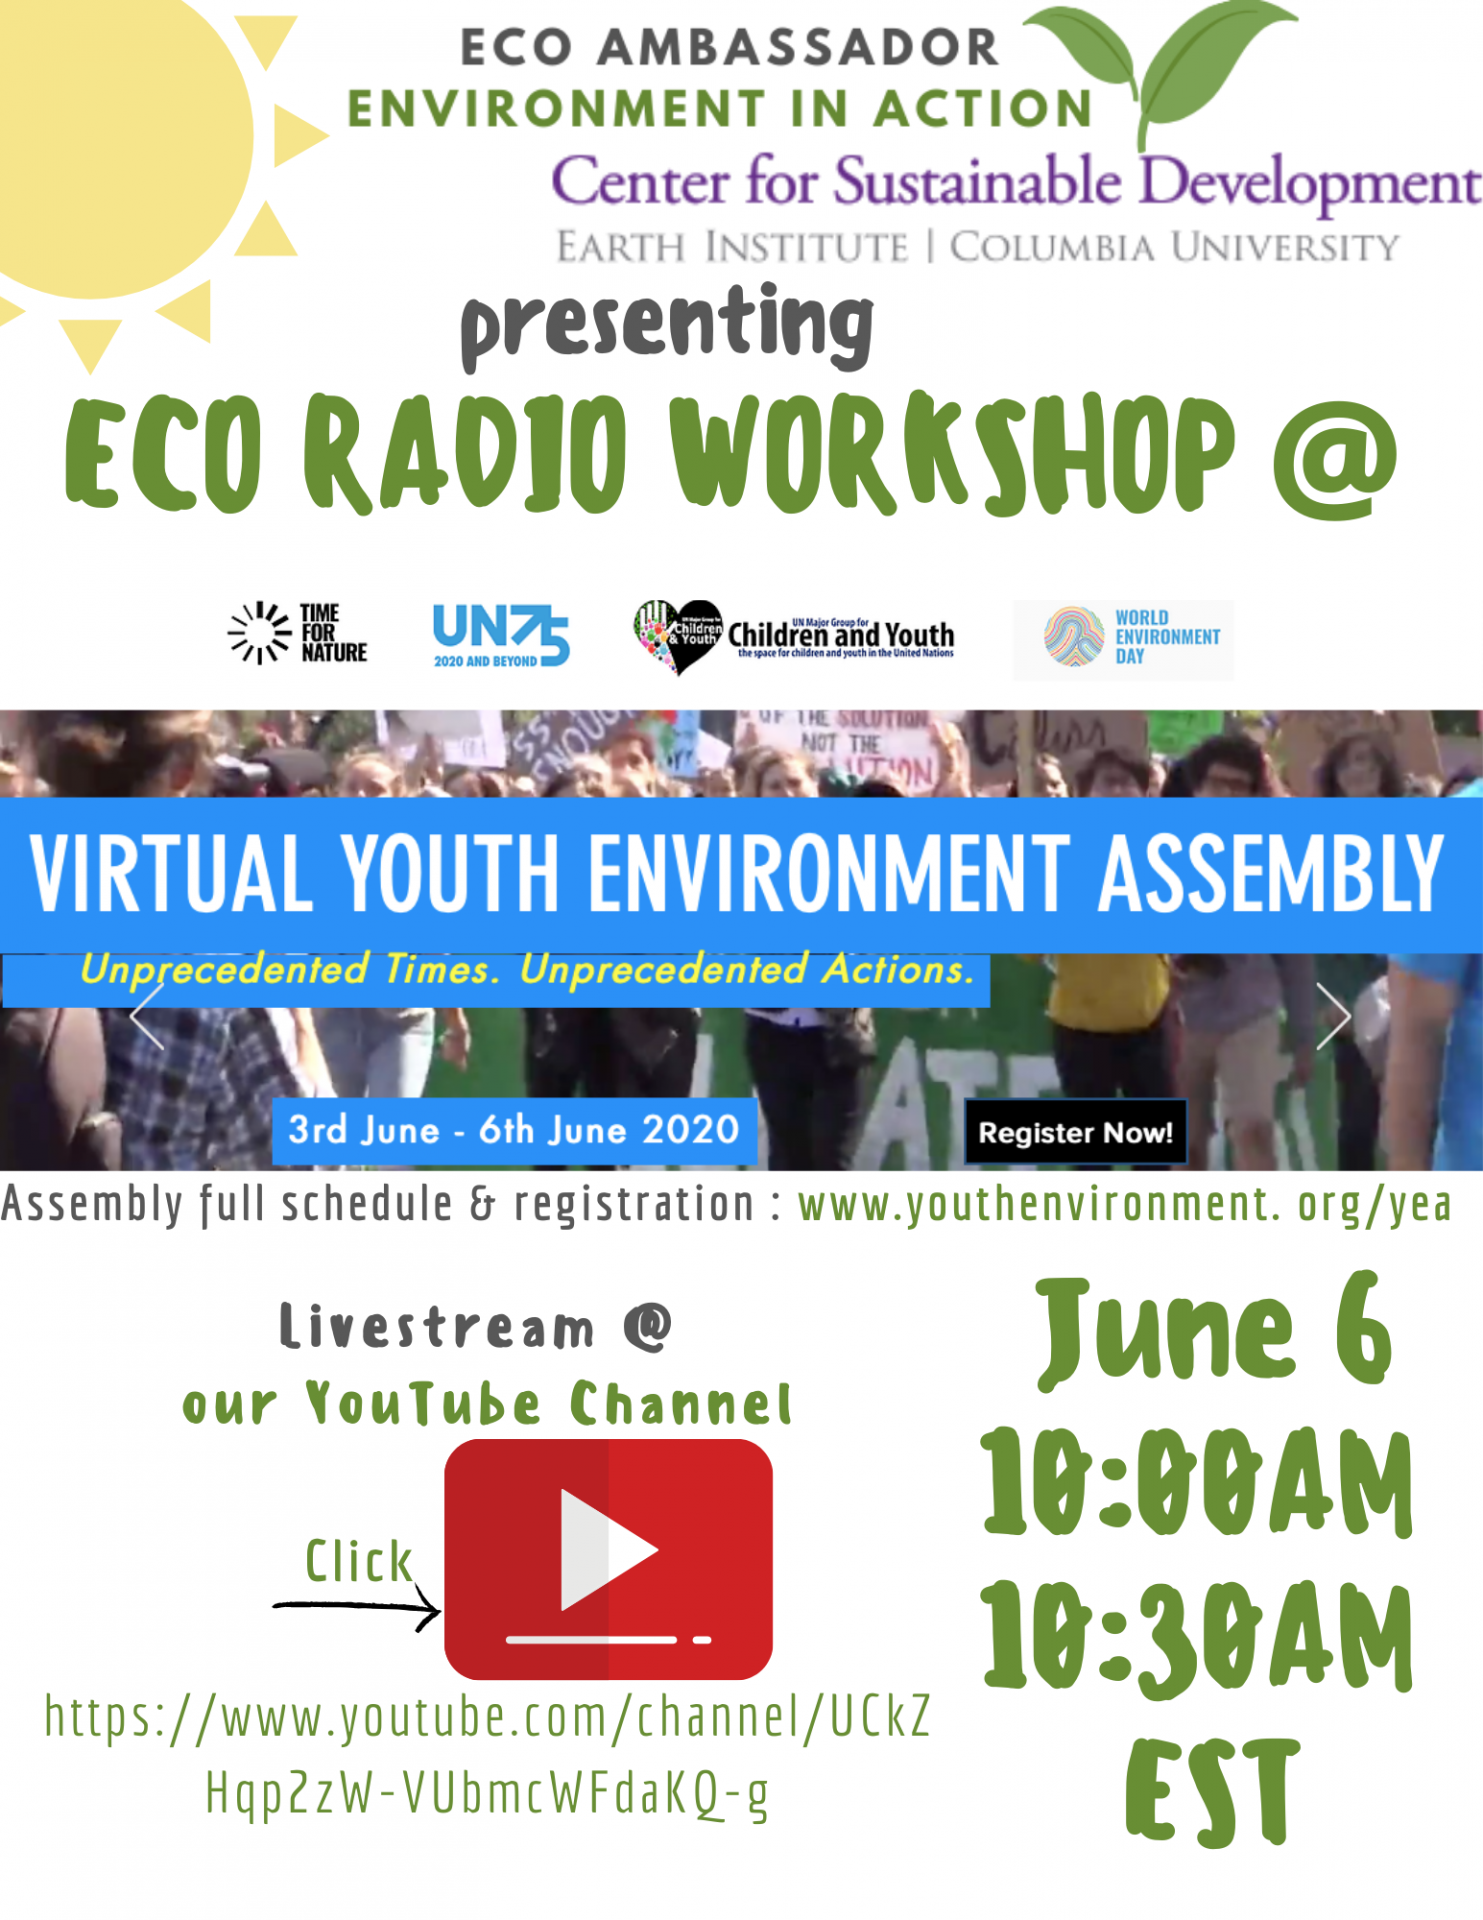 Event poster for Eco Ambassador at CSD presenting Eco Radio Workshop at UNEP Youth event